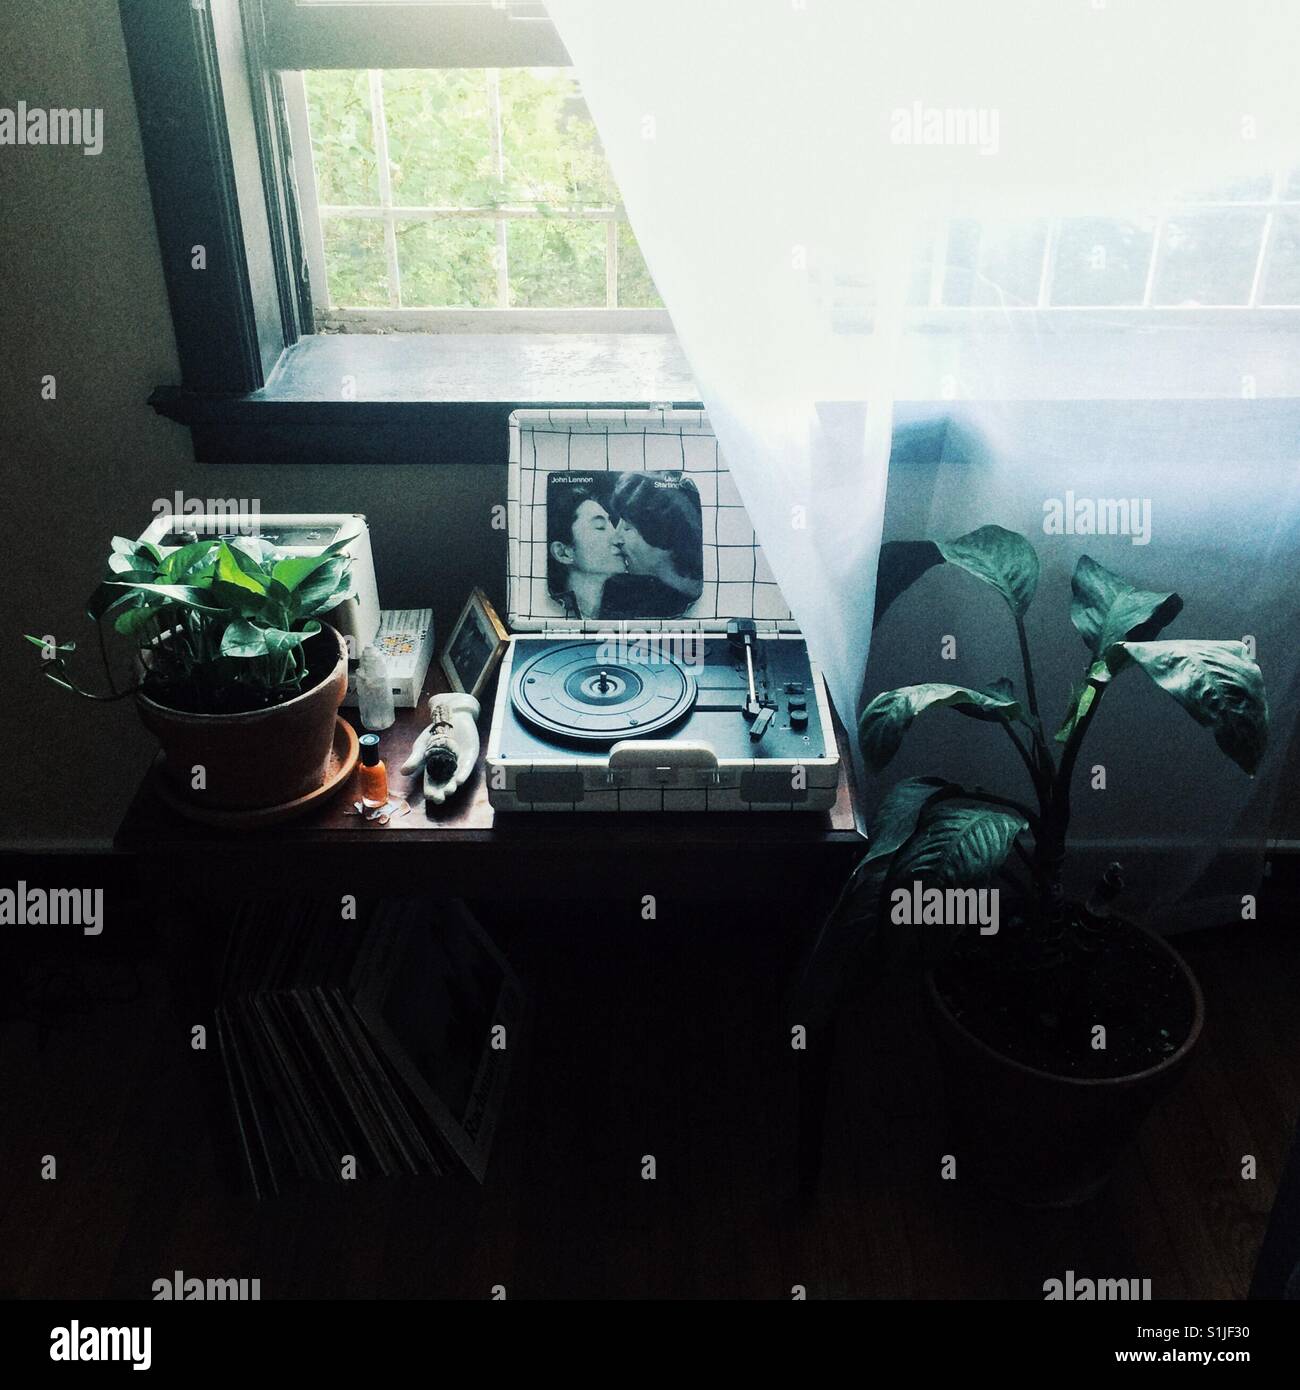 Vintage record player and house plants on a table under windowsill Stock Photo